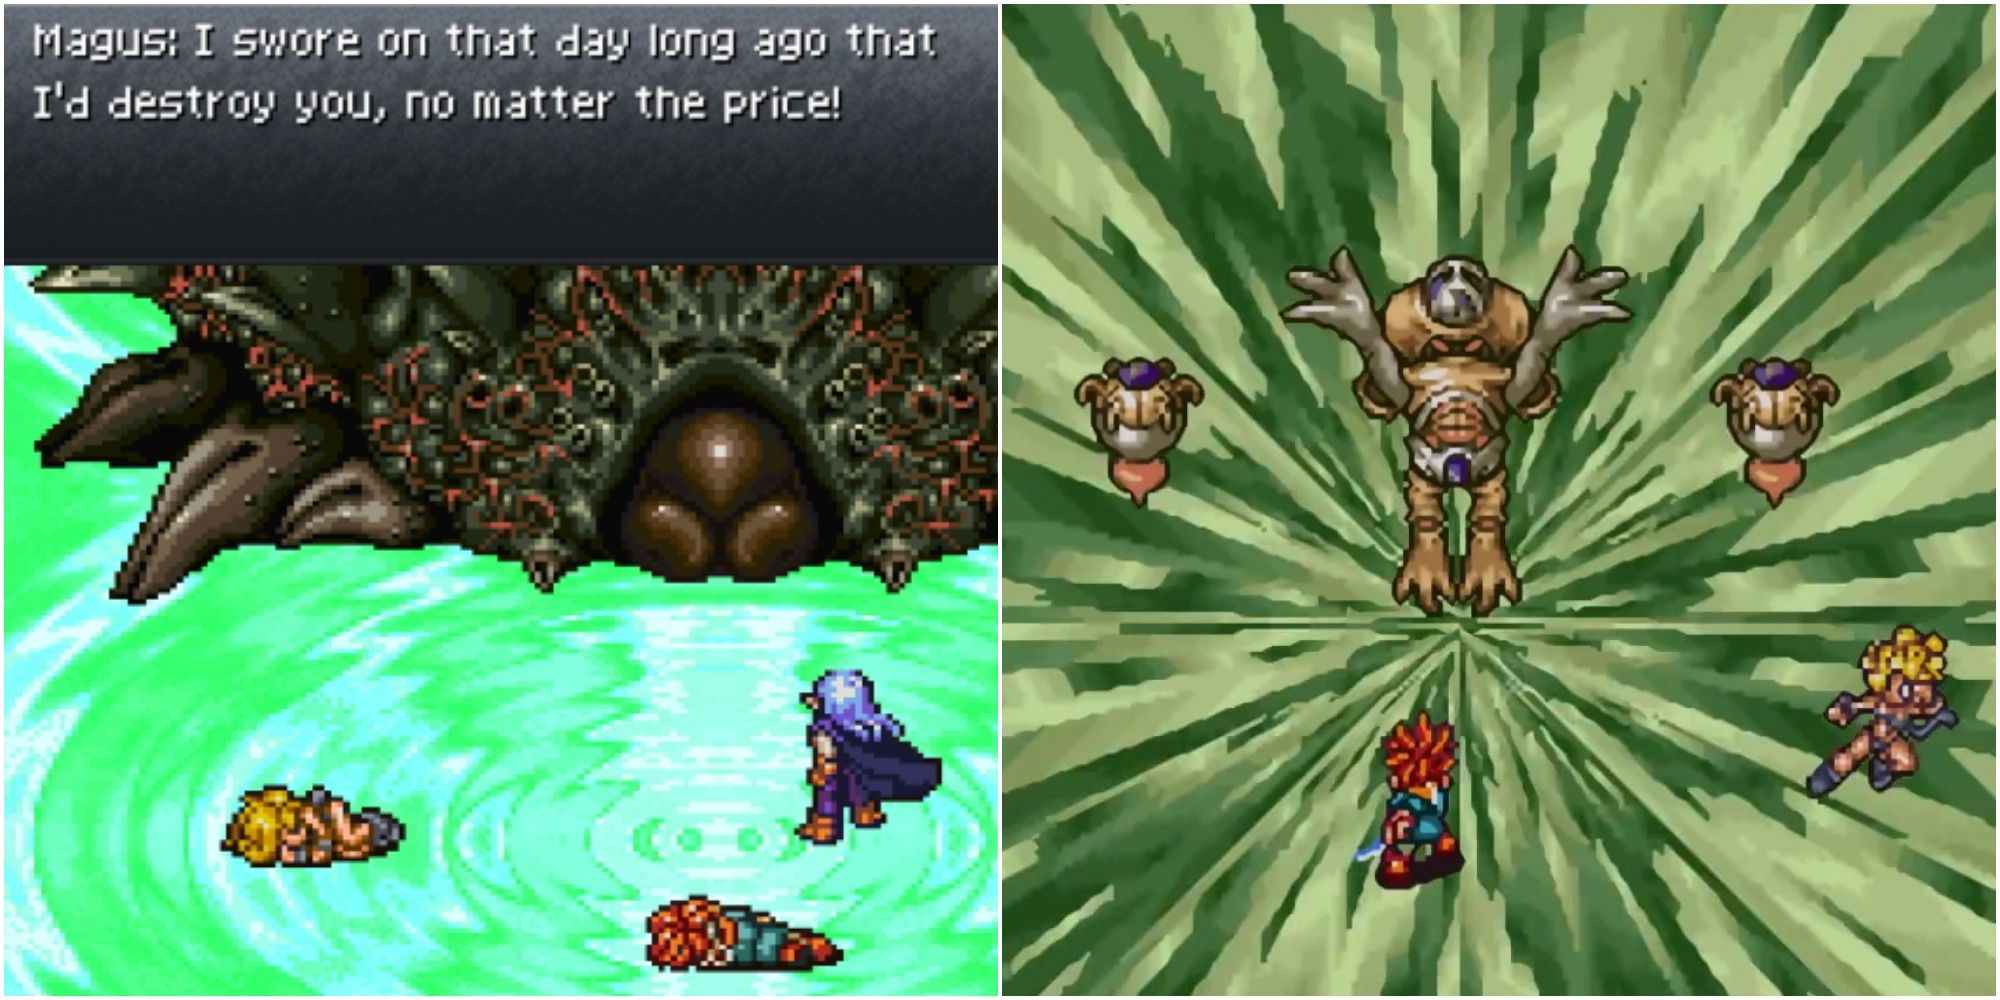 Split image screenshots of Magus speaking to Lavos and Lavos’ final form.